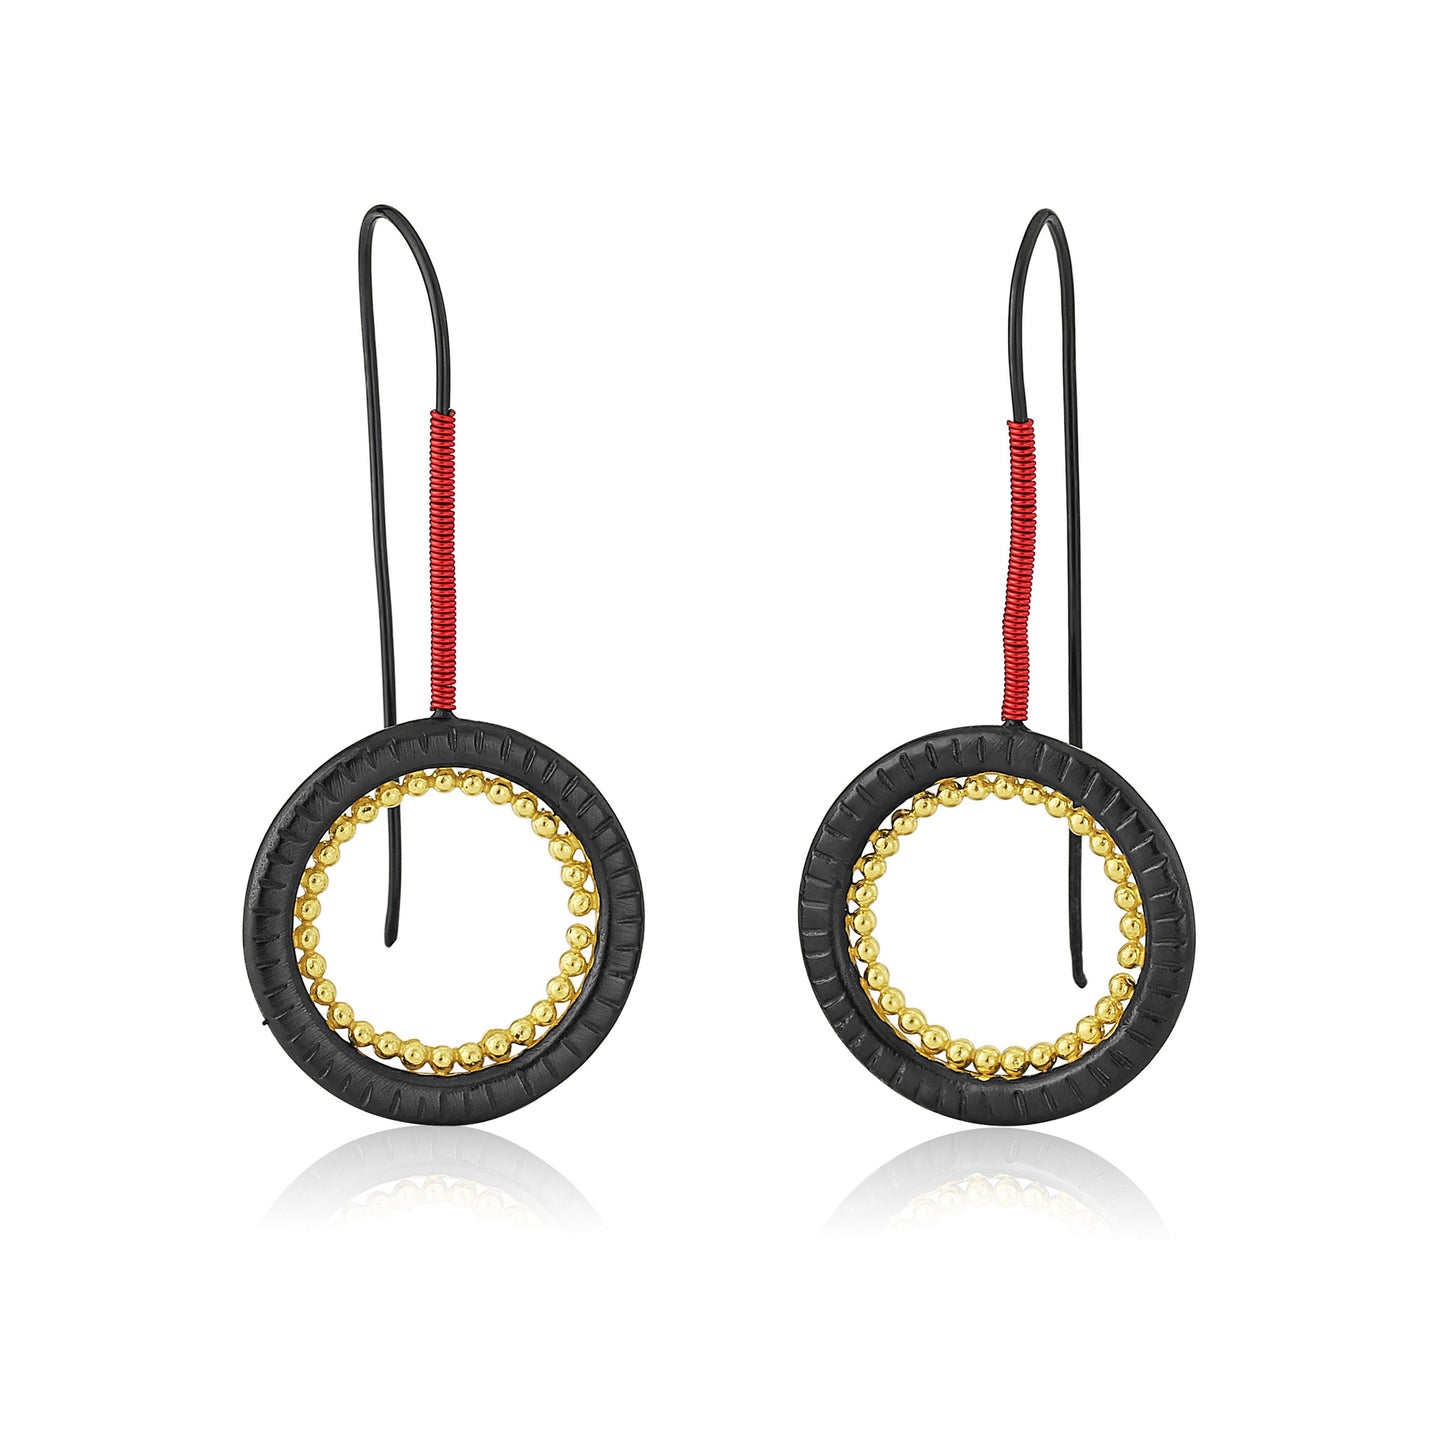 Brushed Sterling Silver, Red Enamelled and Gold Plated Earrings